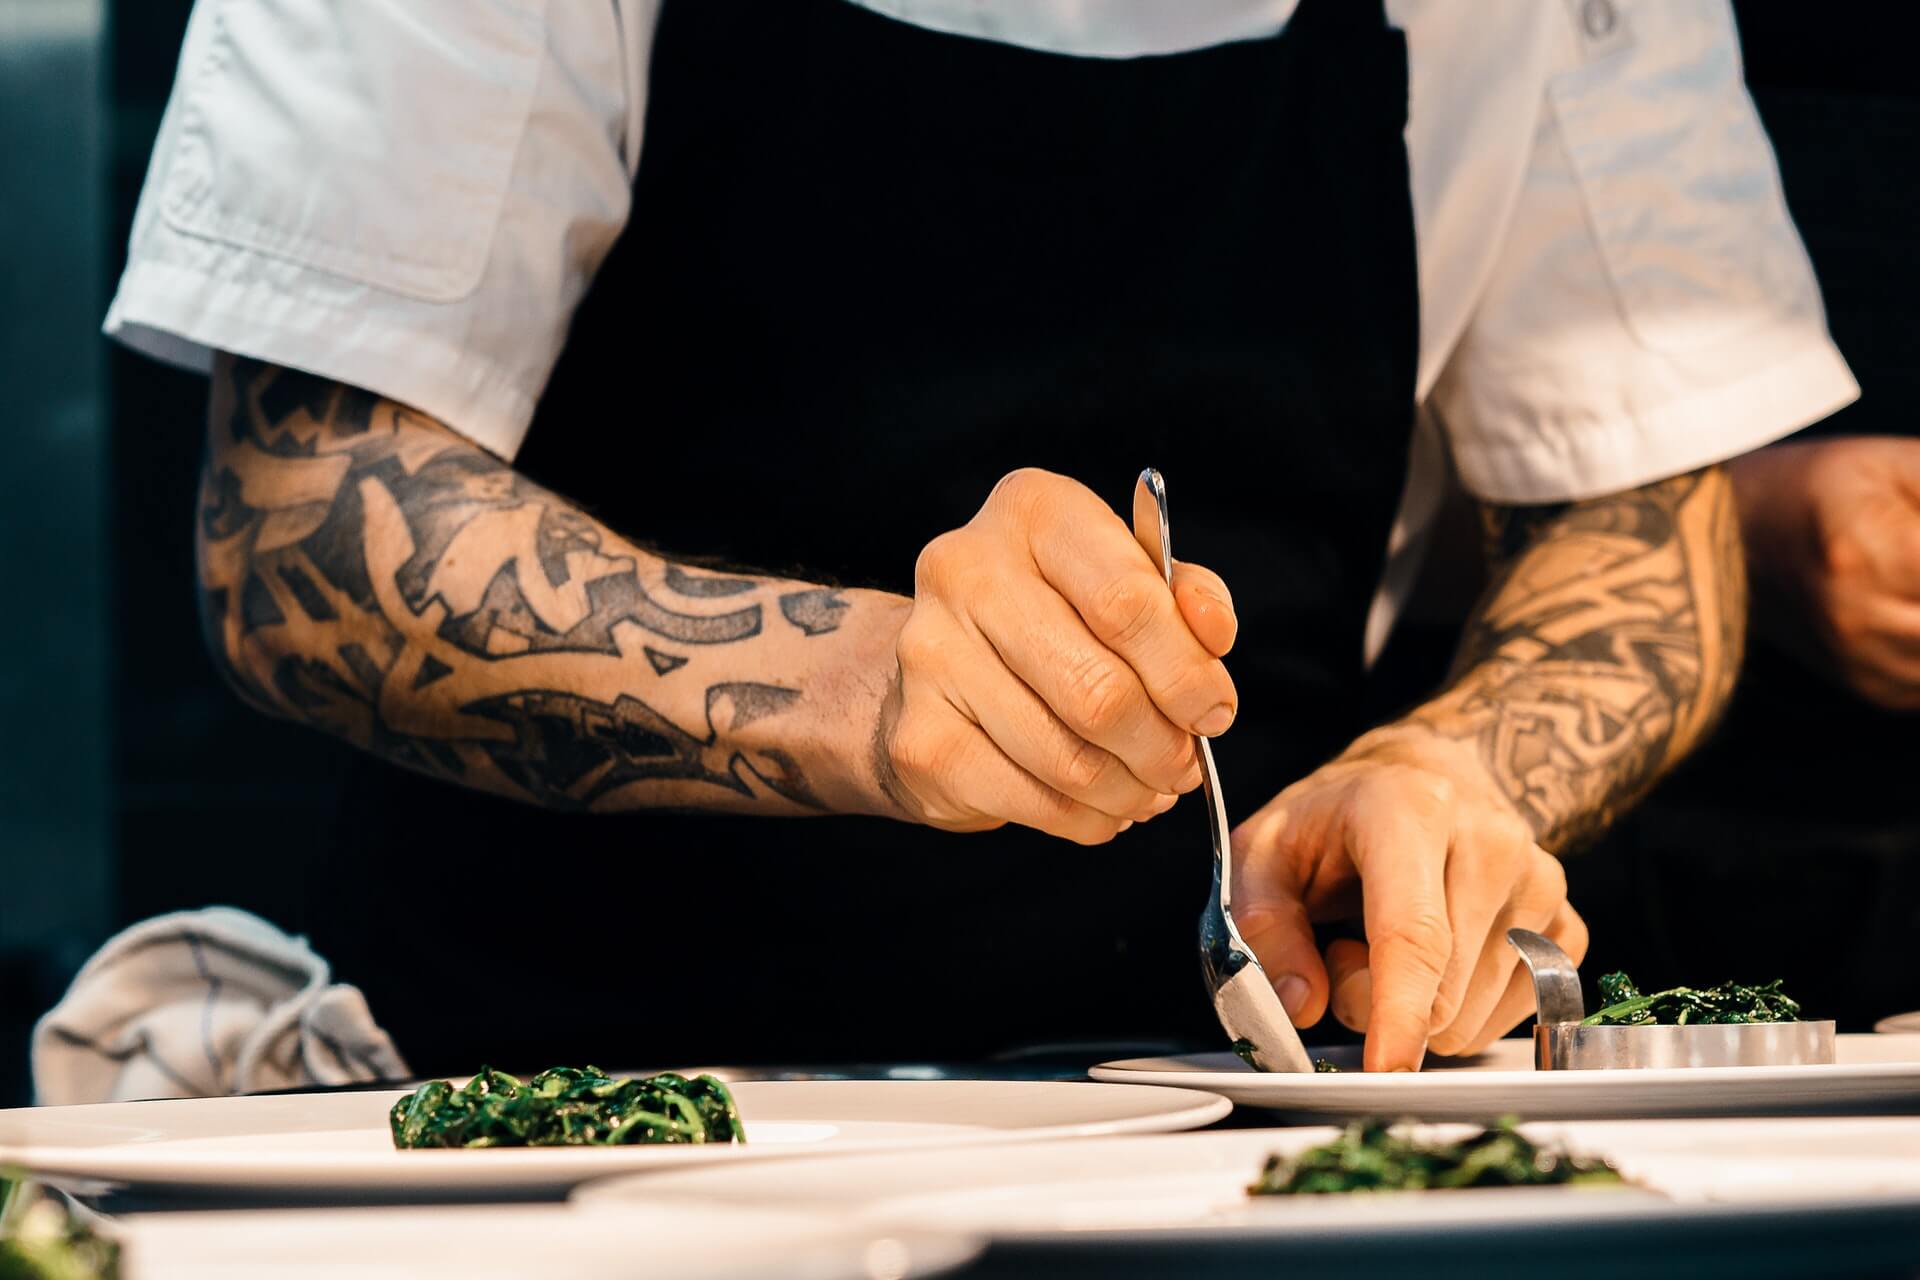 Chef plating greens on plates